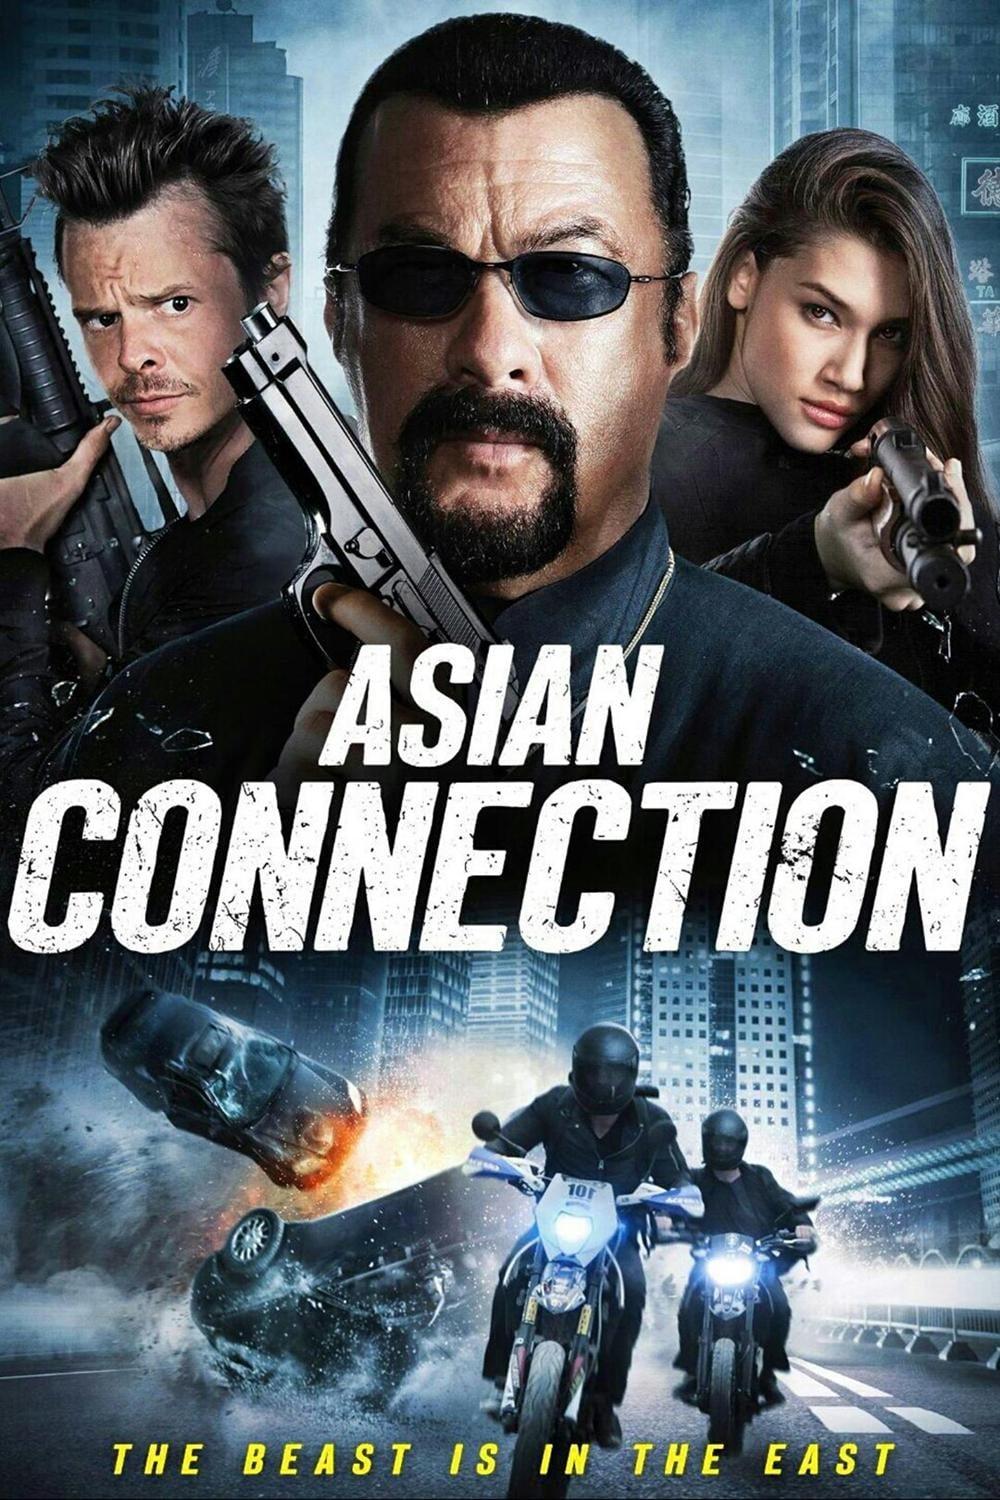 The Asian Connection poster